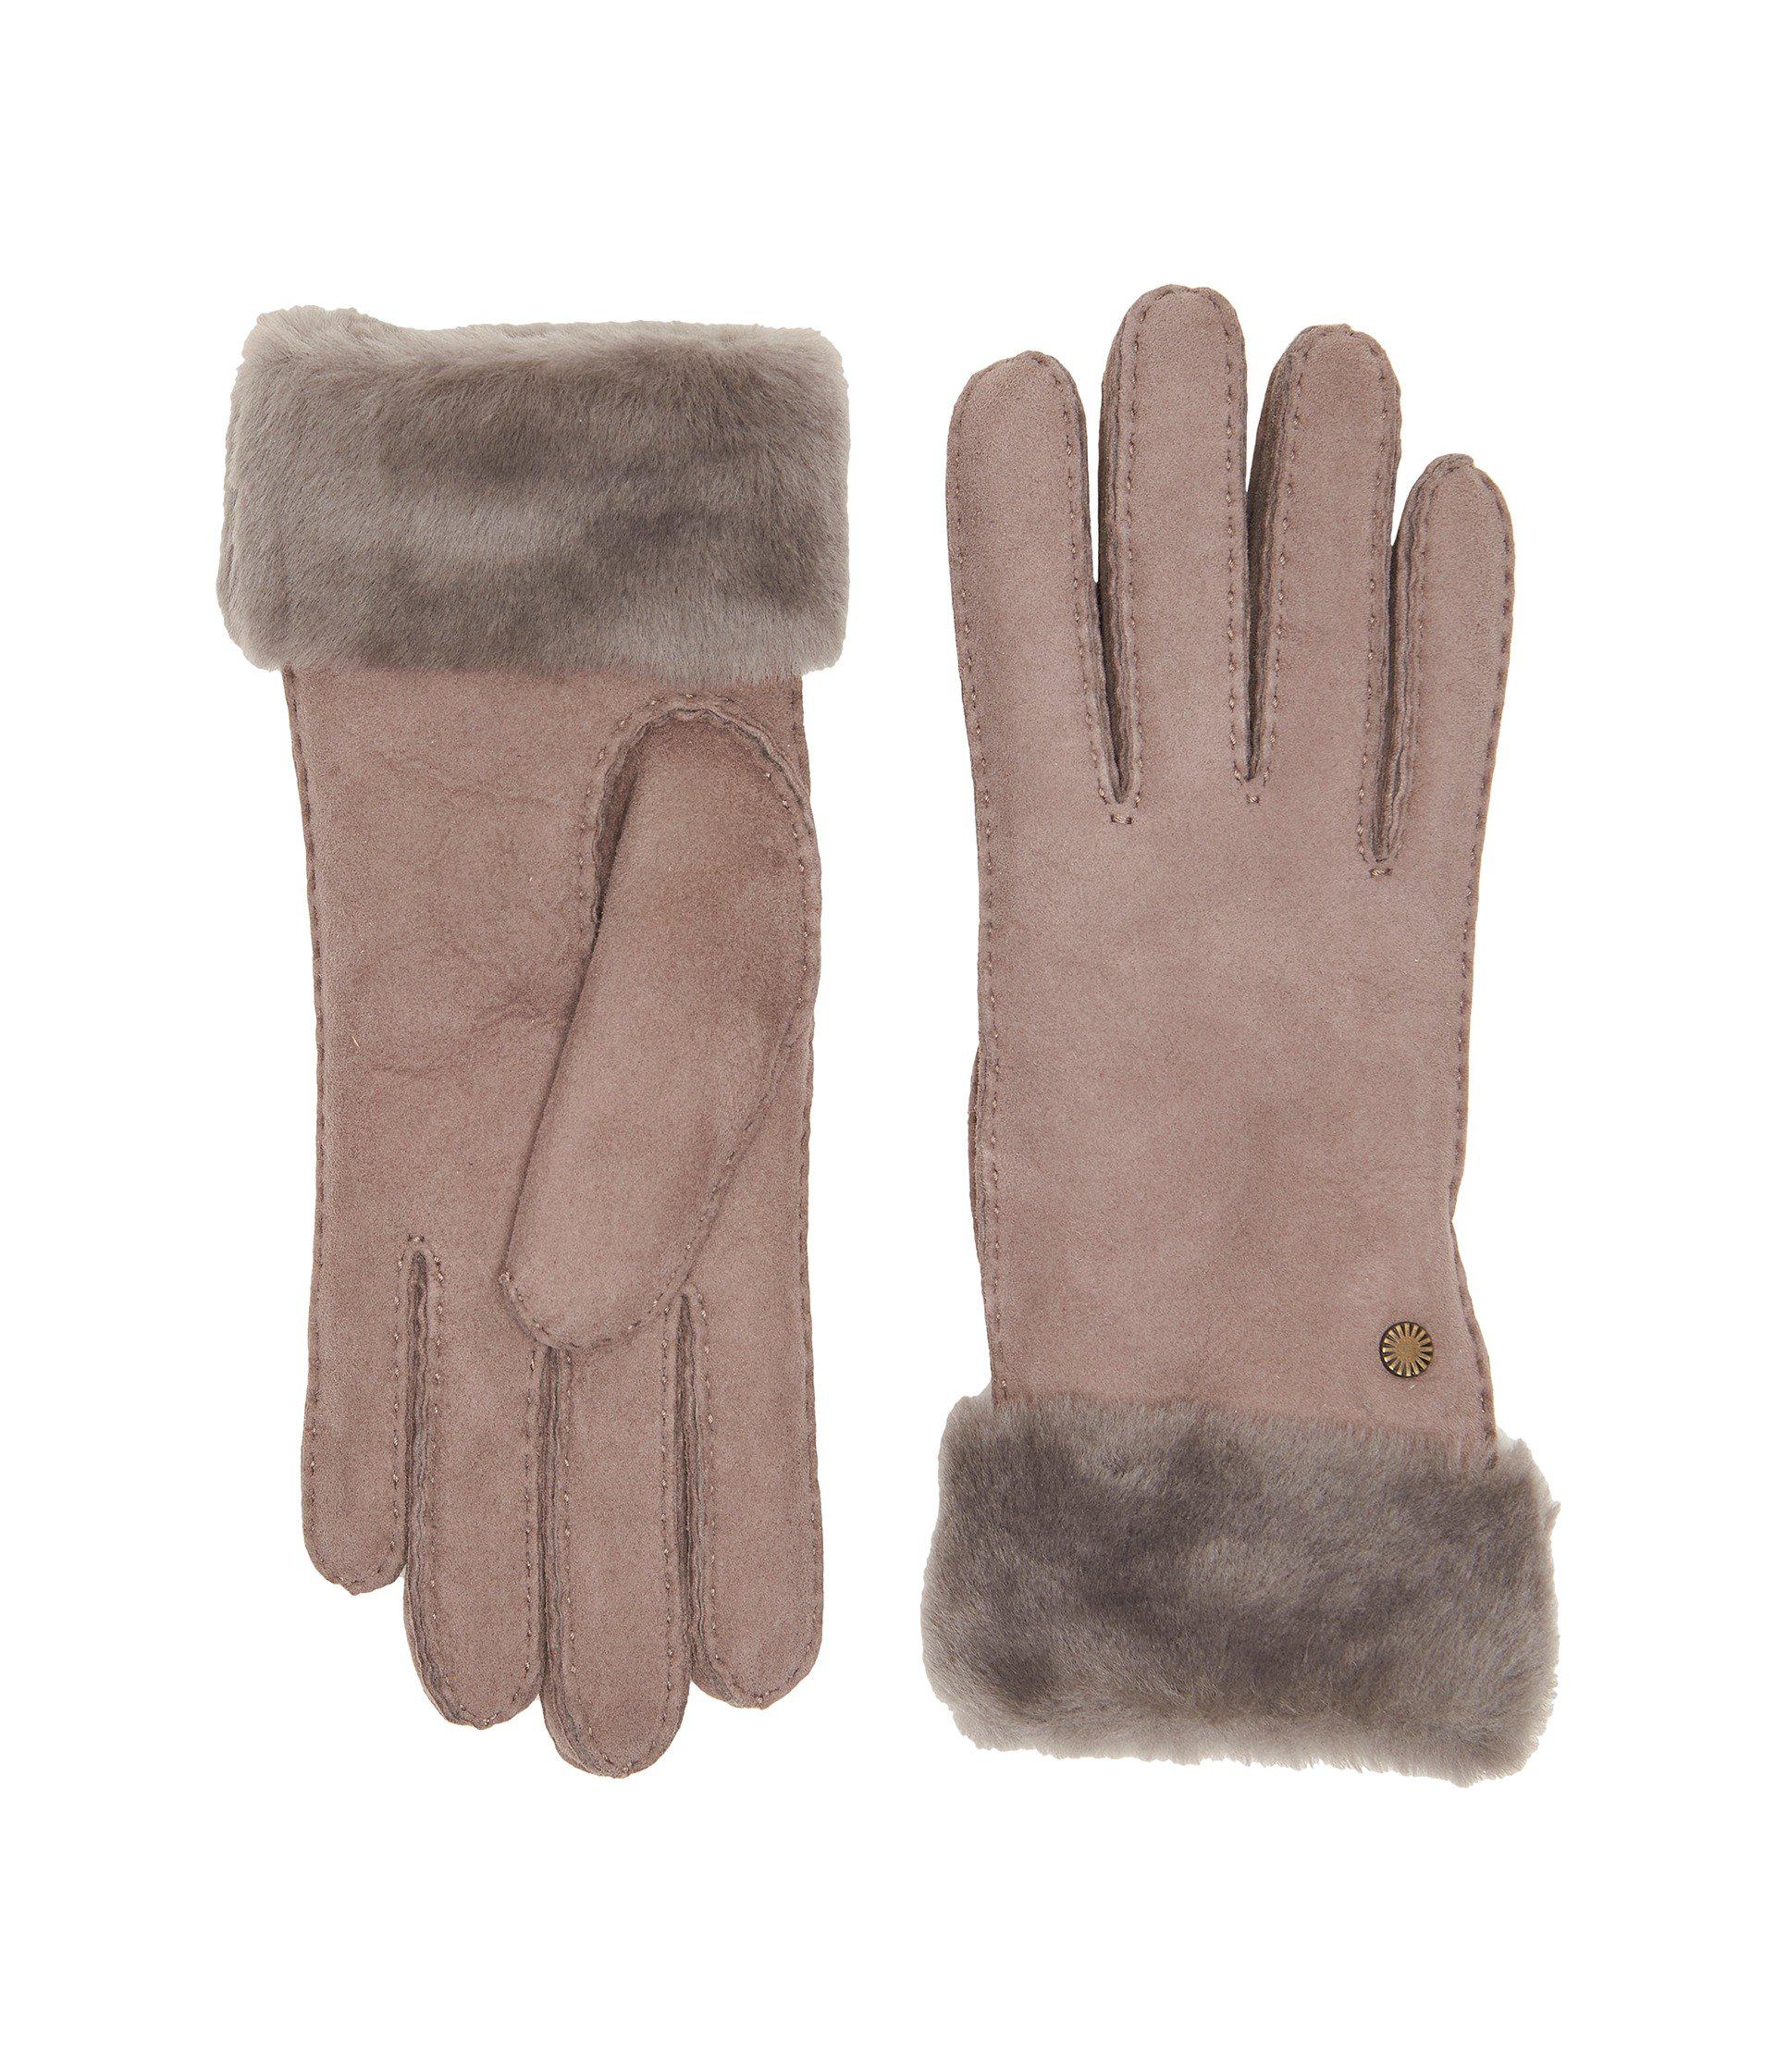 Ugg Shearling Sheepskin Turn Cuff Gloves - Images Gloves and ...